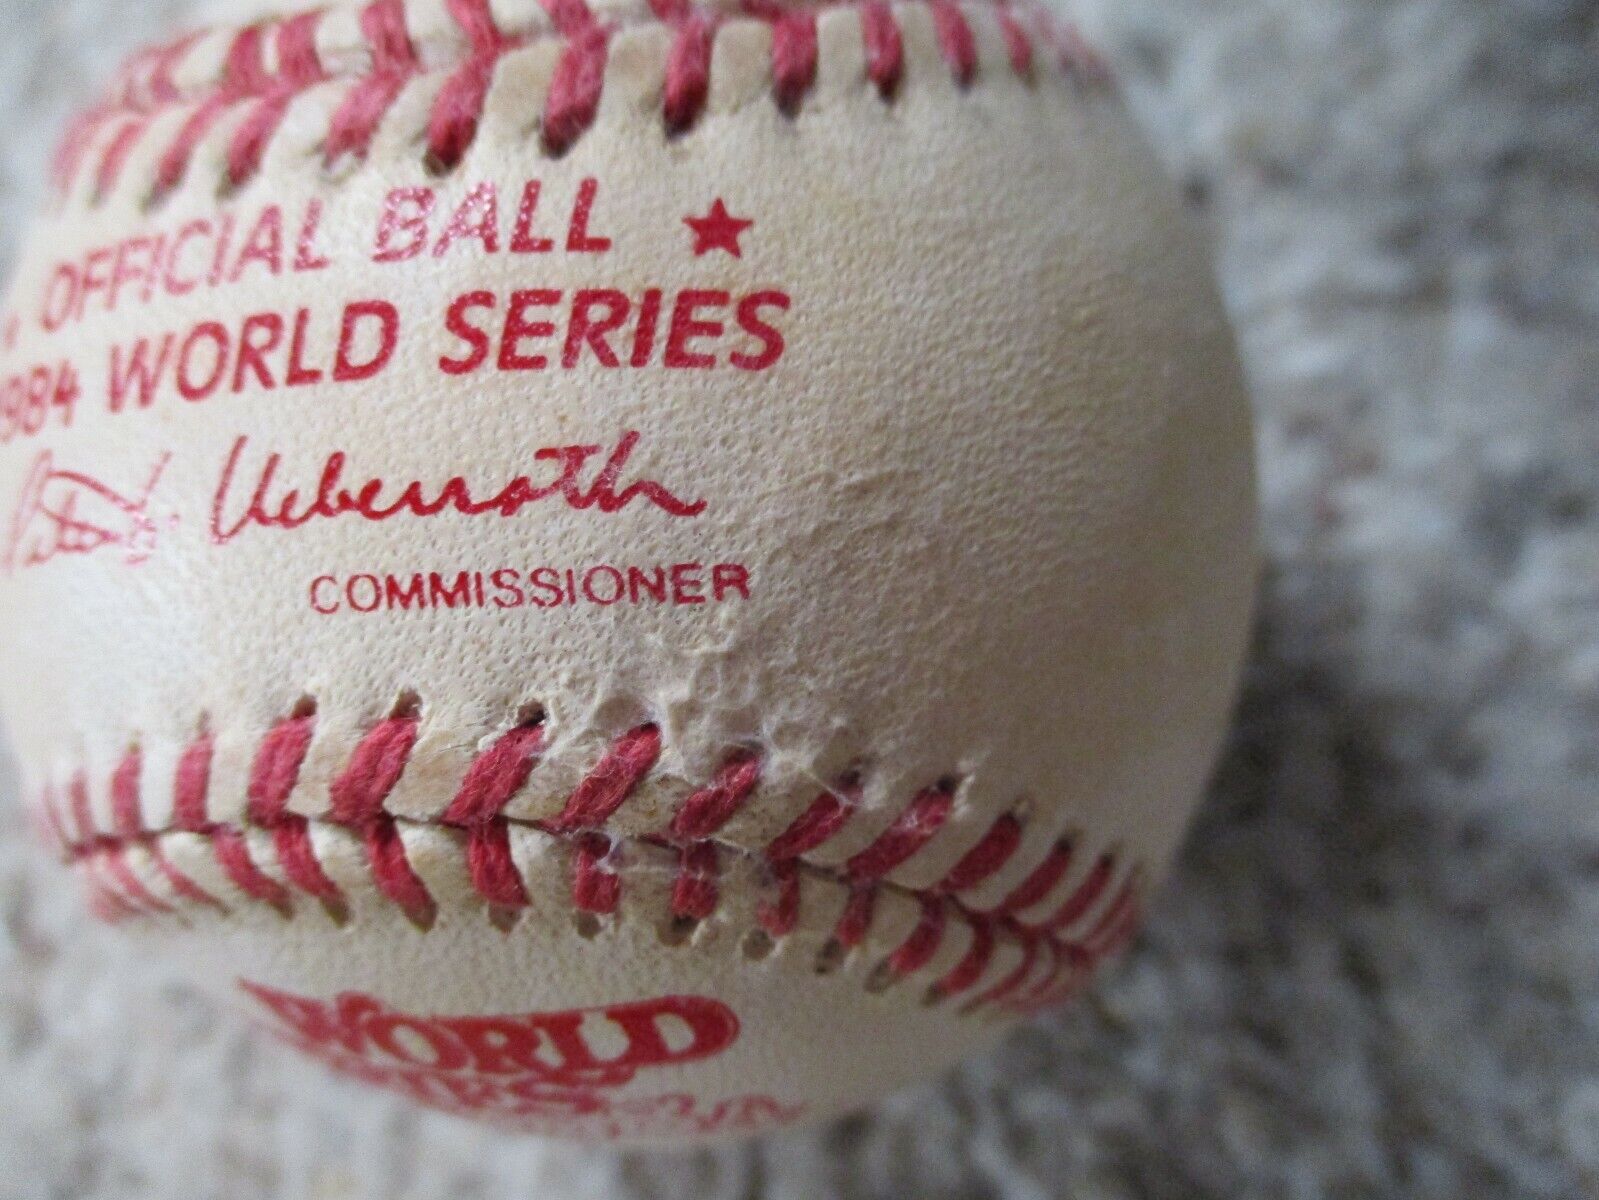 1984 Official World Series Rawlings Tigers Padres Toned Original Vintage Ball